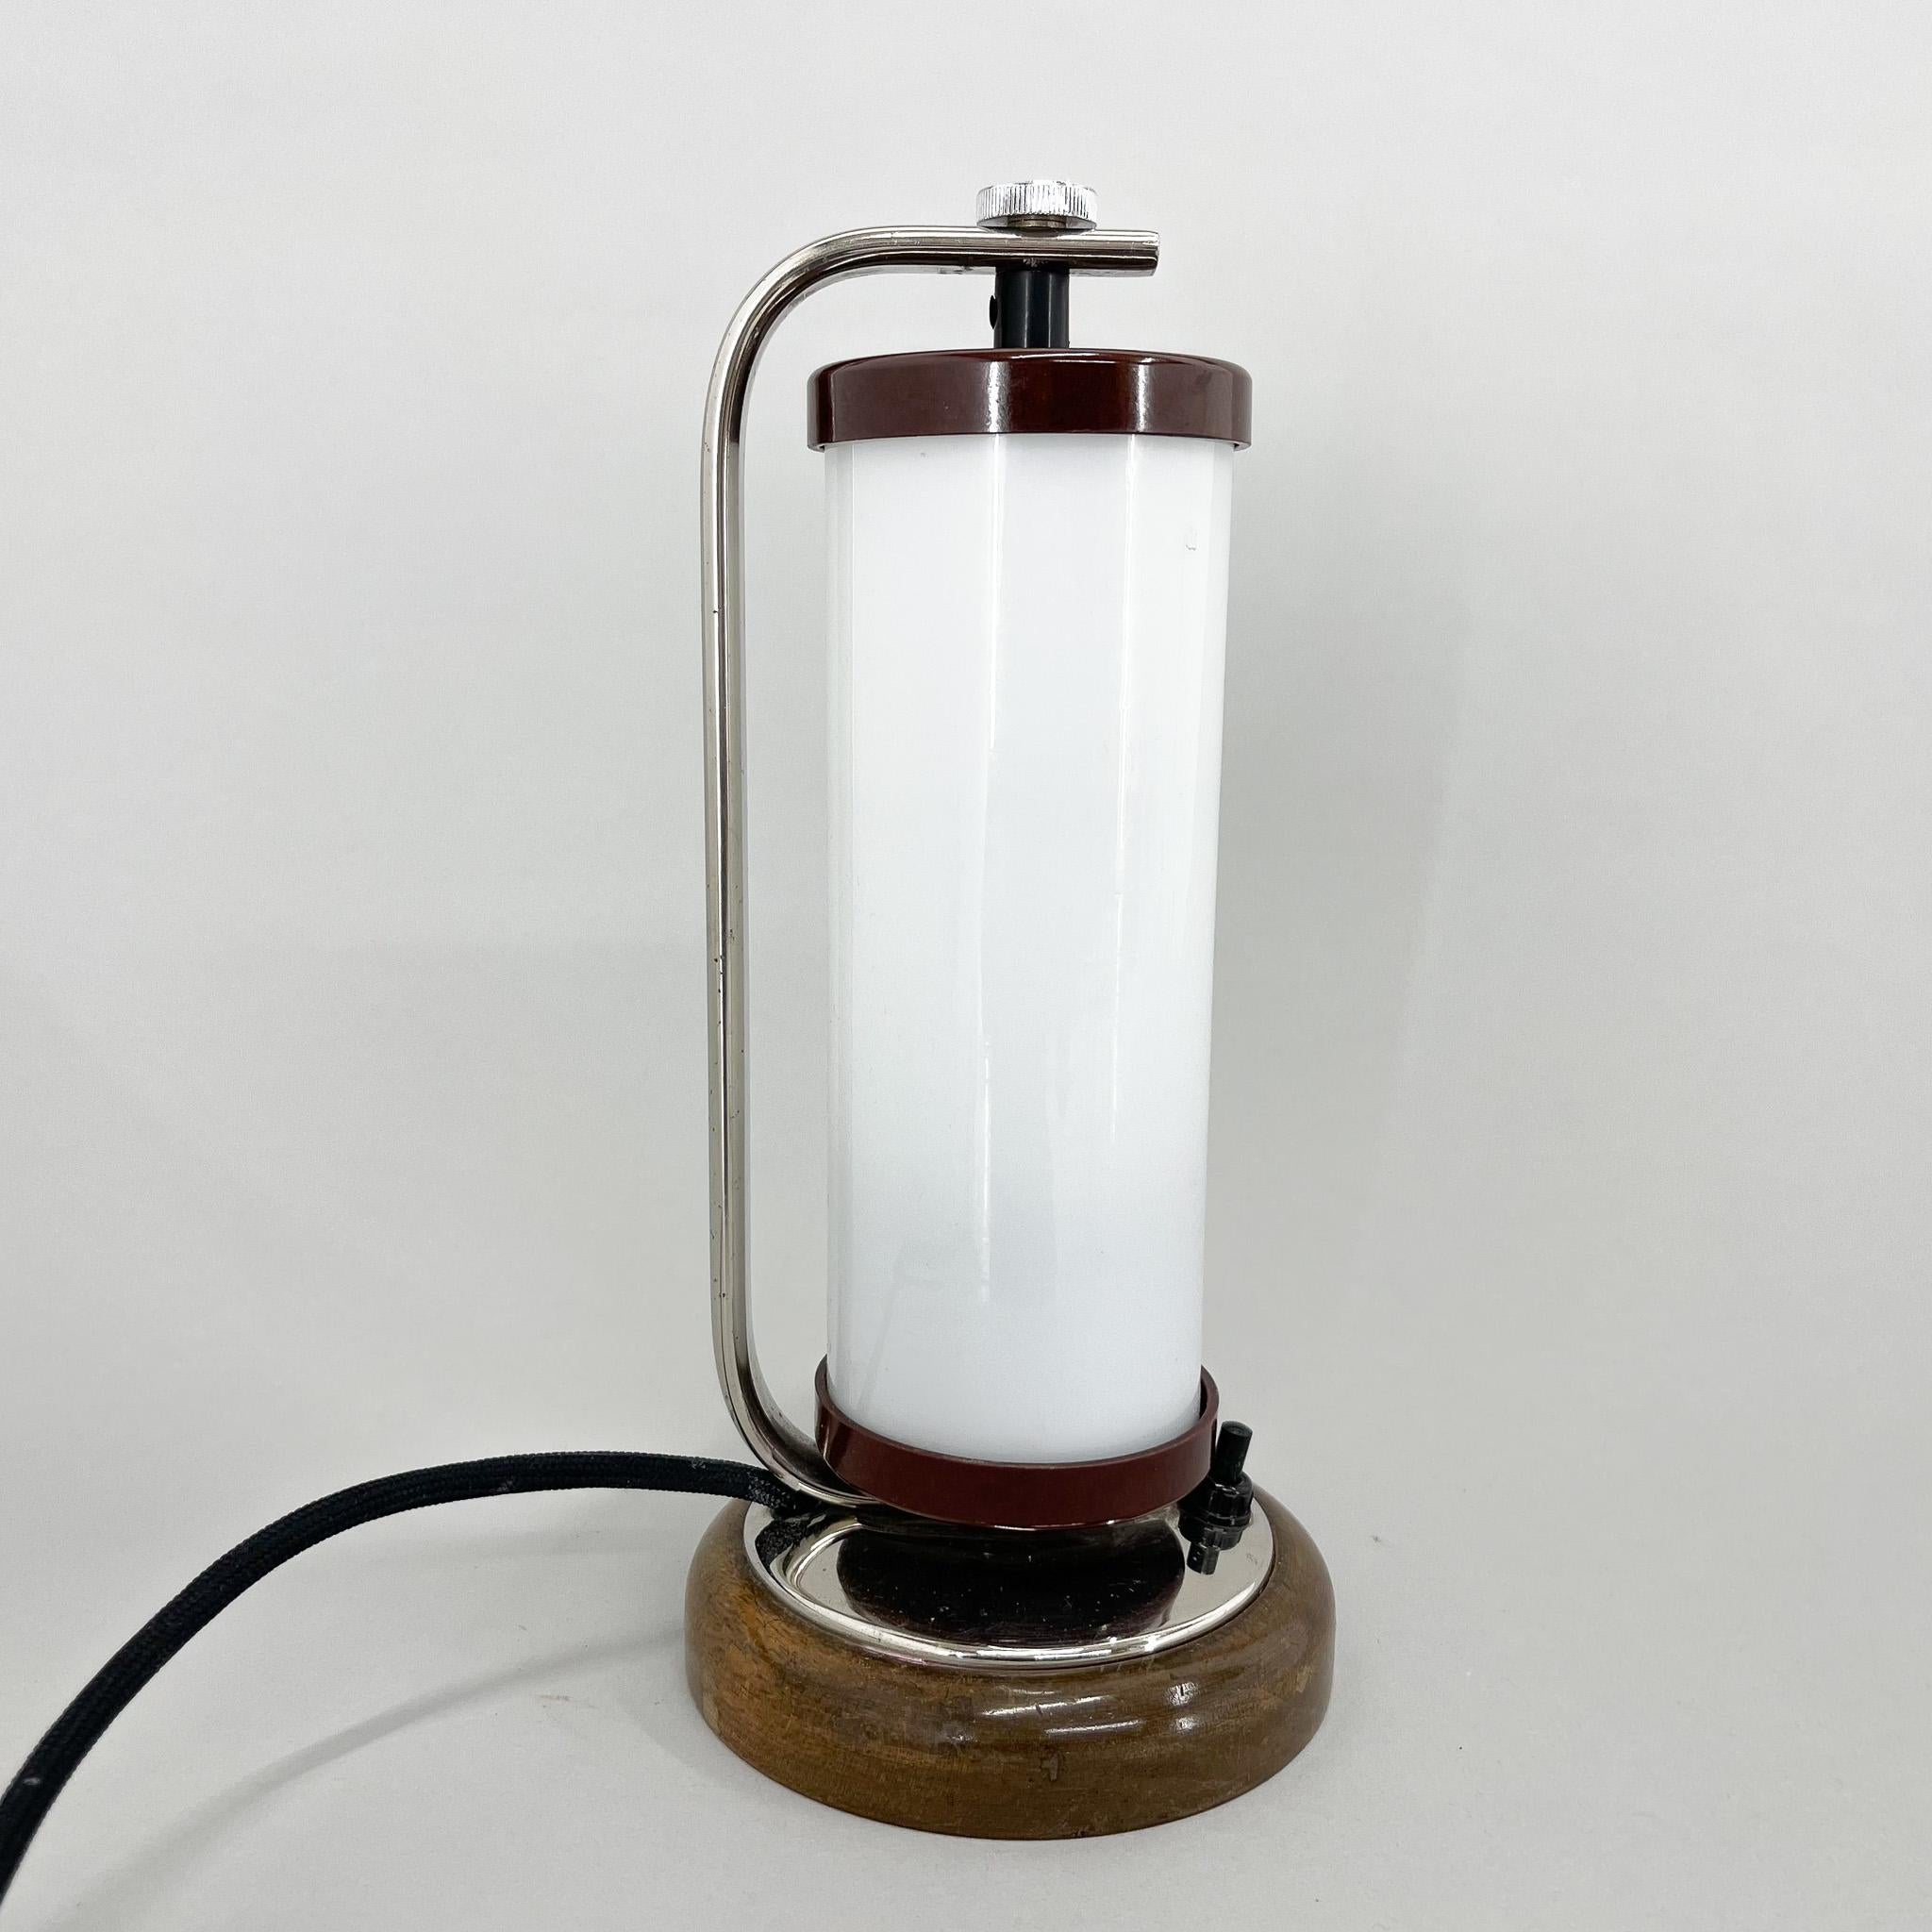 Tubular Table or Bedside Lamp with Wooden Base, 1930's For Sale 5